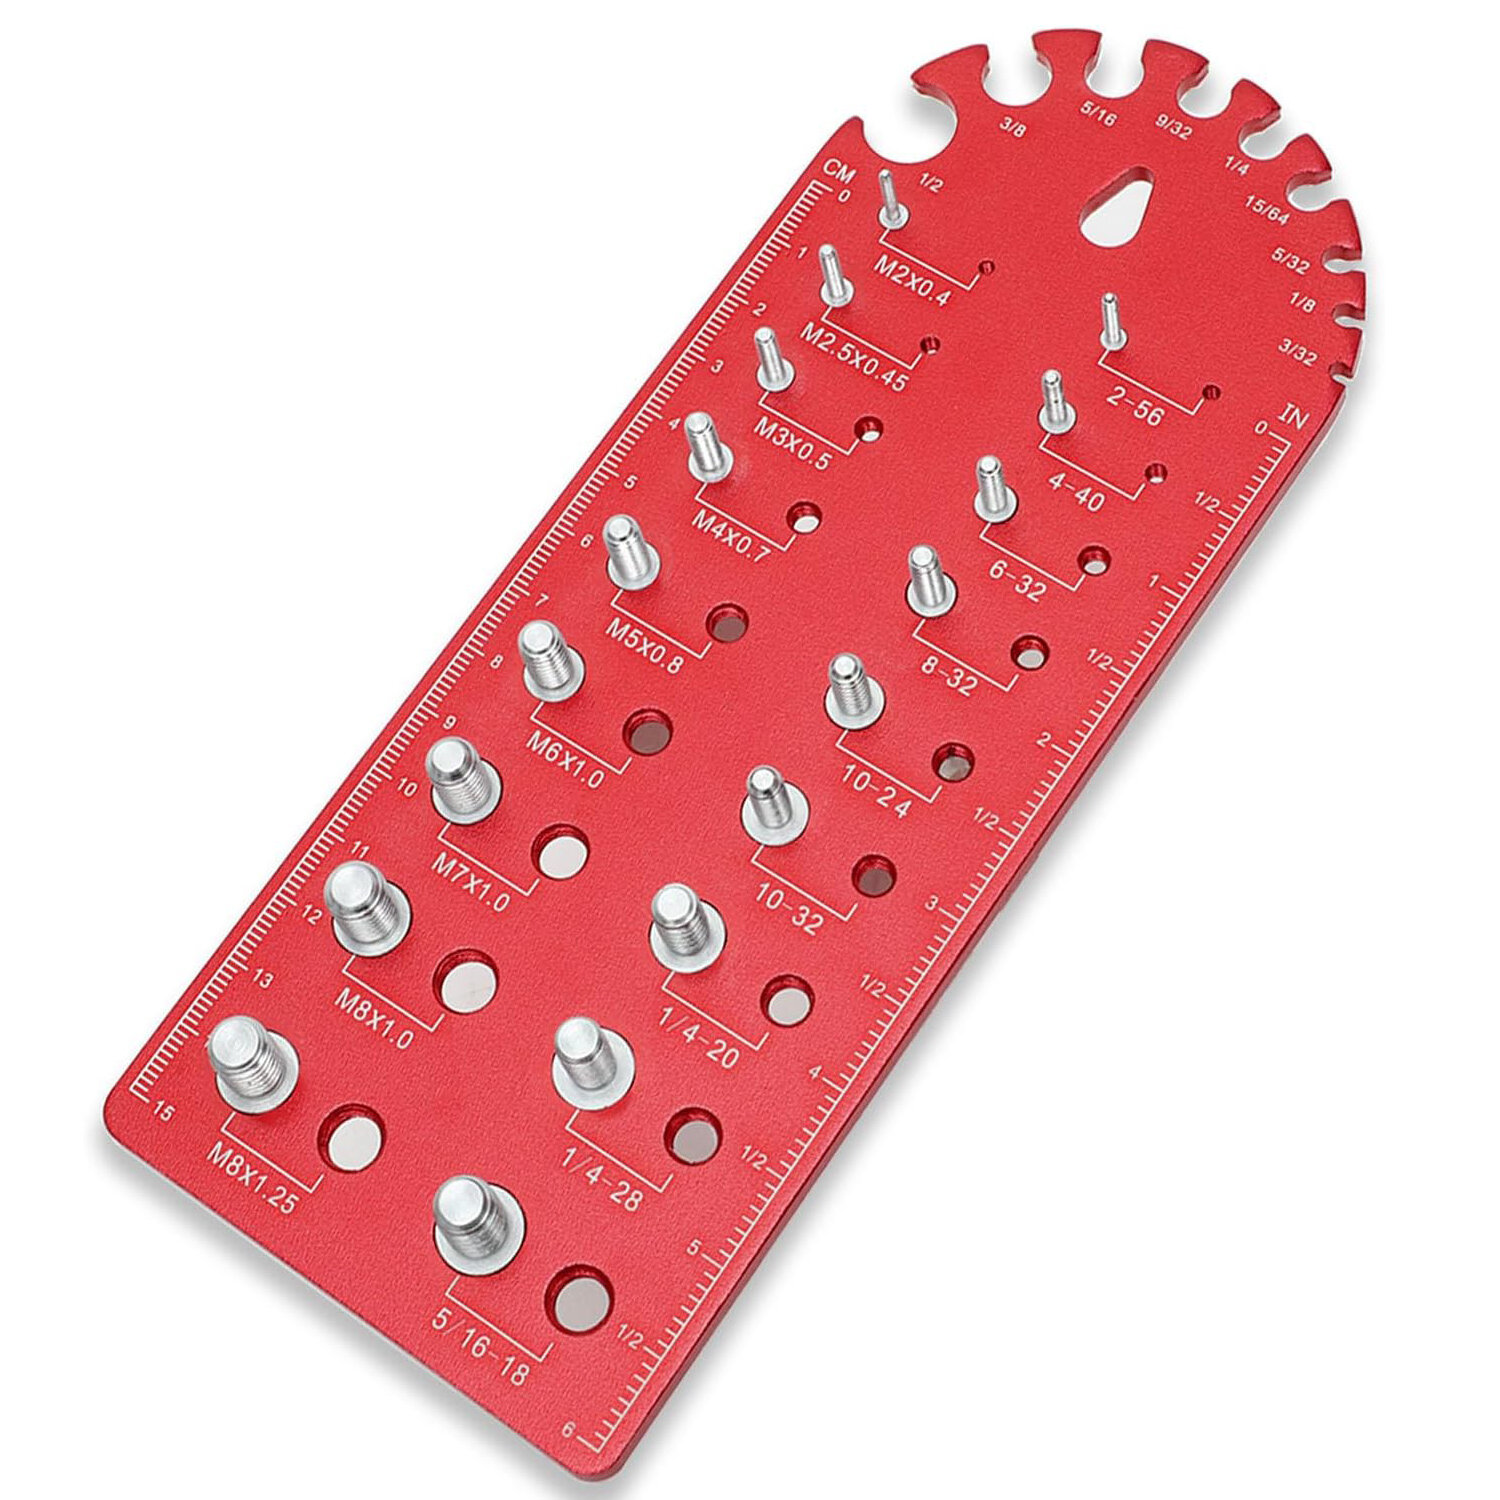 Portable 18 Holes Nut and Bolt Thread Checker Fine Thread Nut and Bolt Size Gauge with SAE and Metric Gauges and Additio